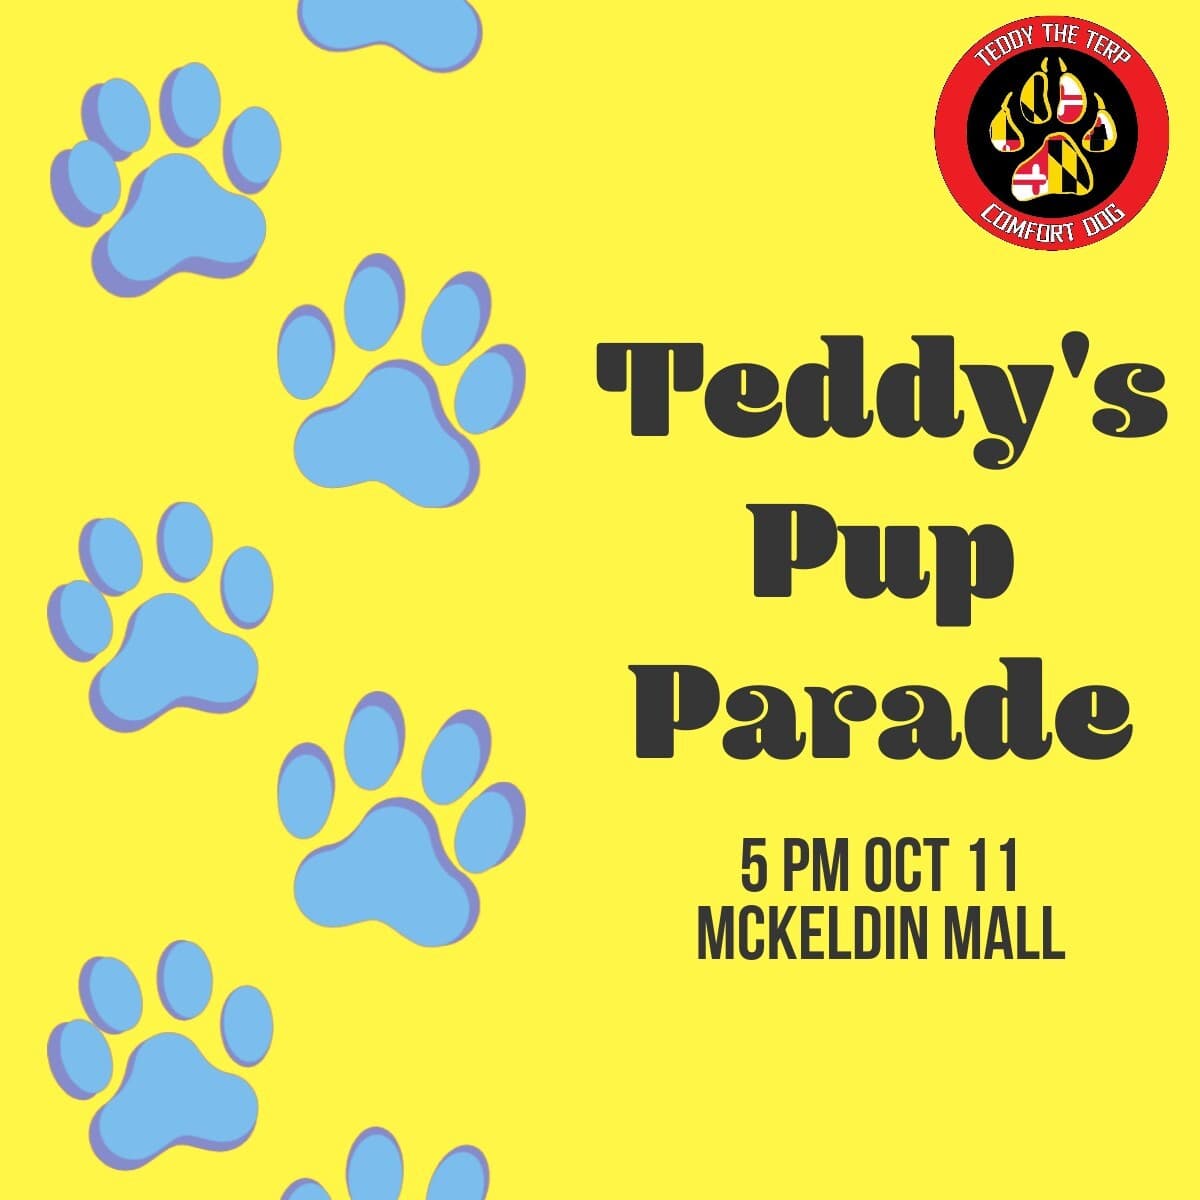 Image for Teddy's Pup Parade event